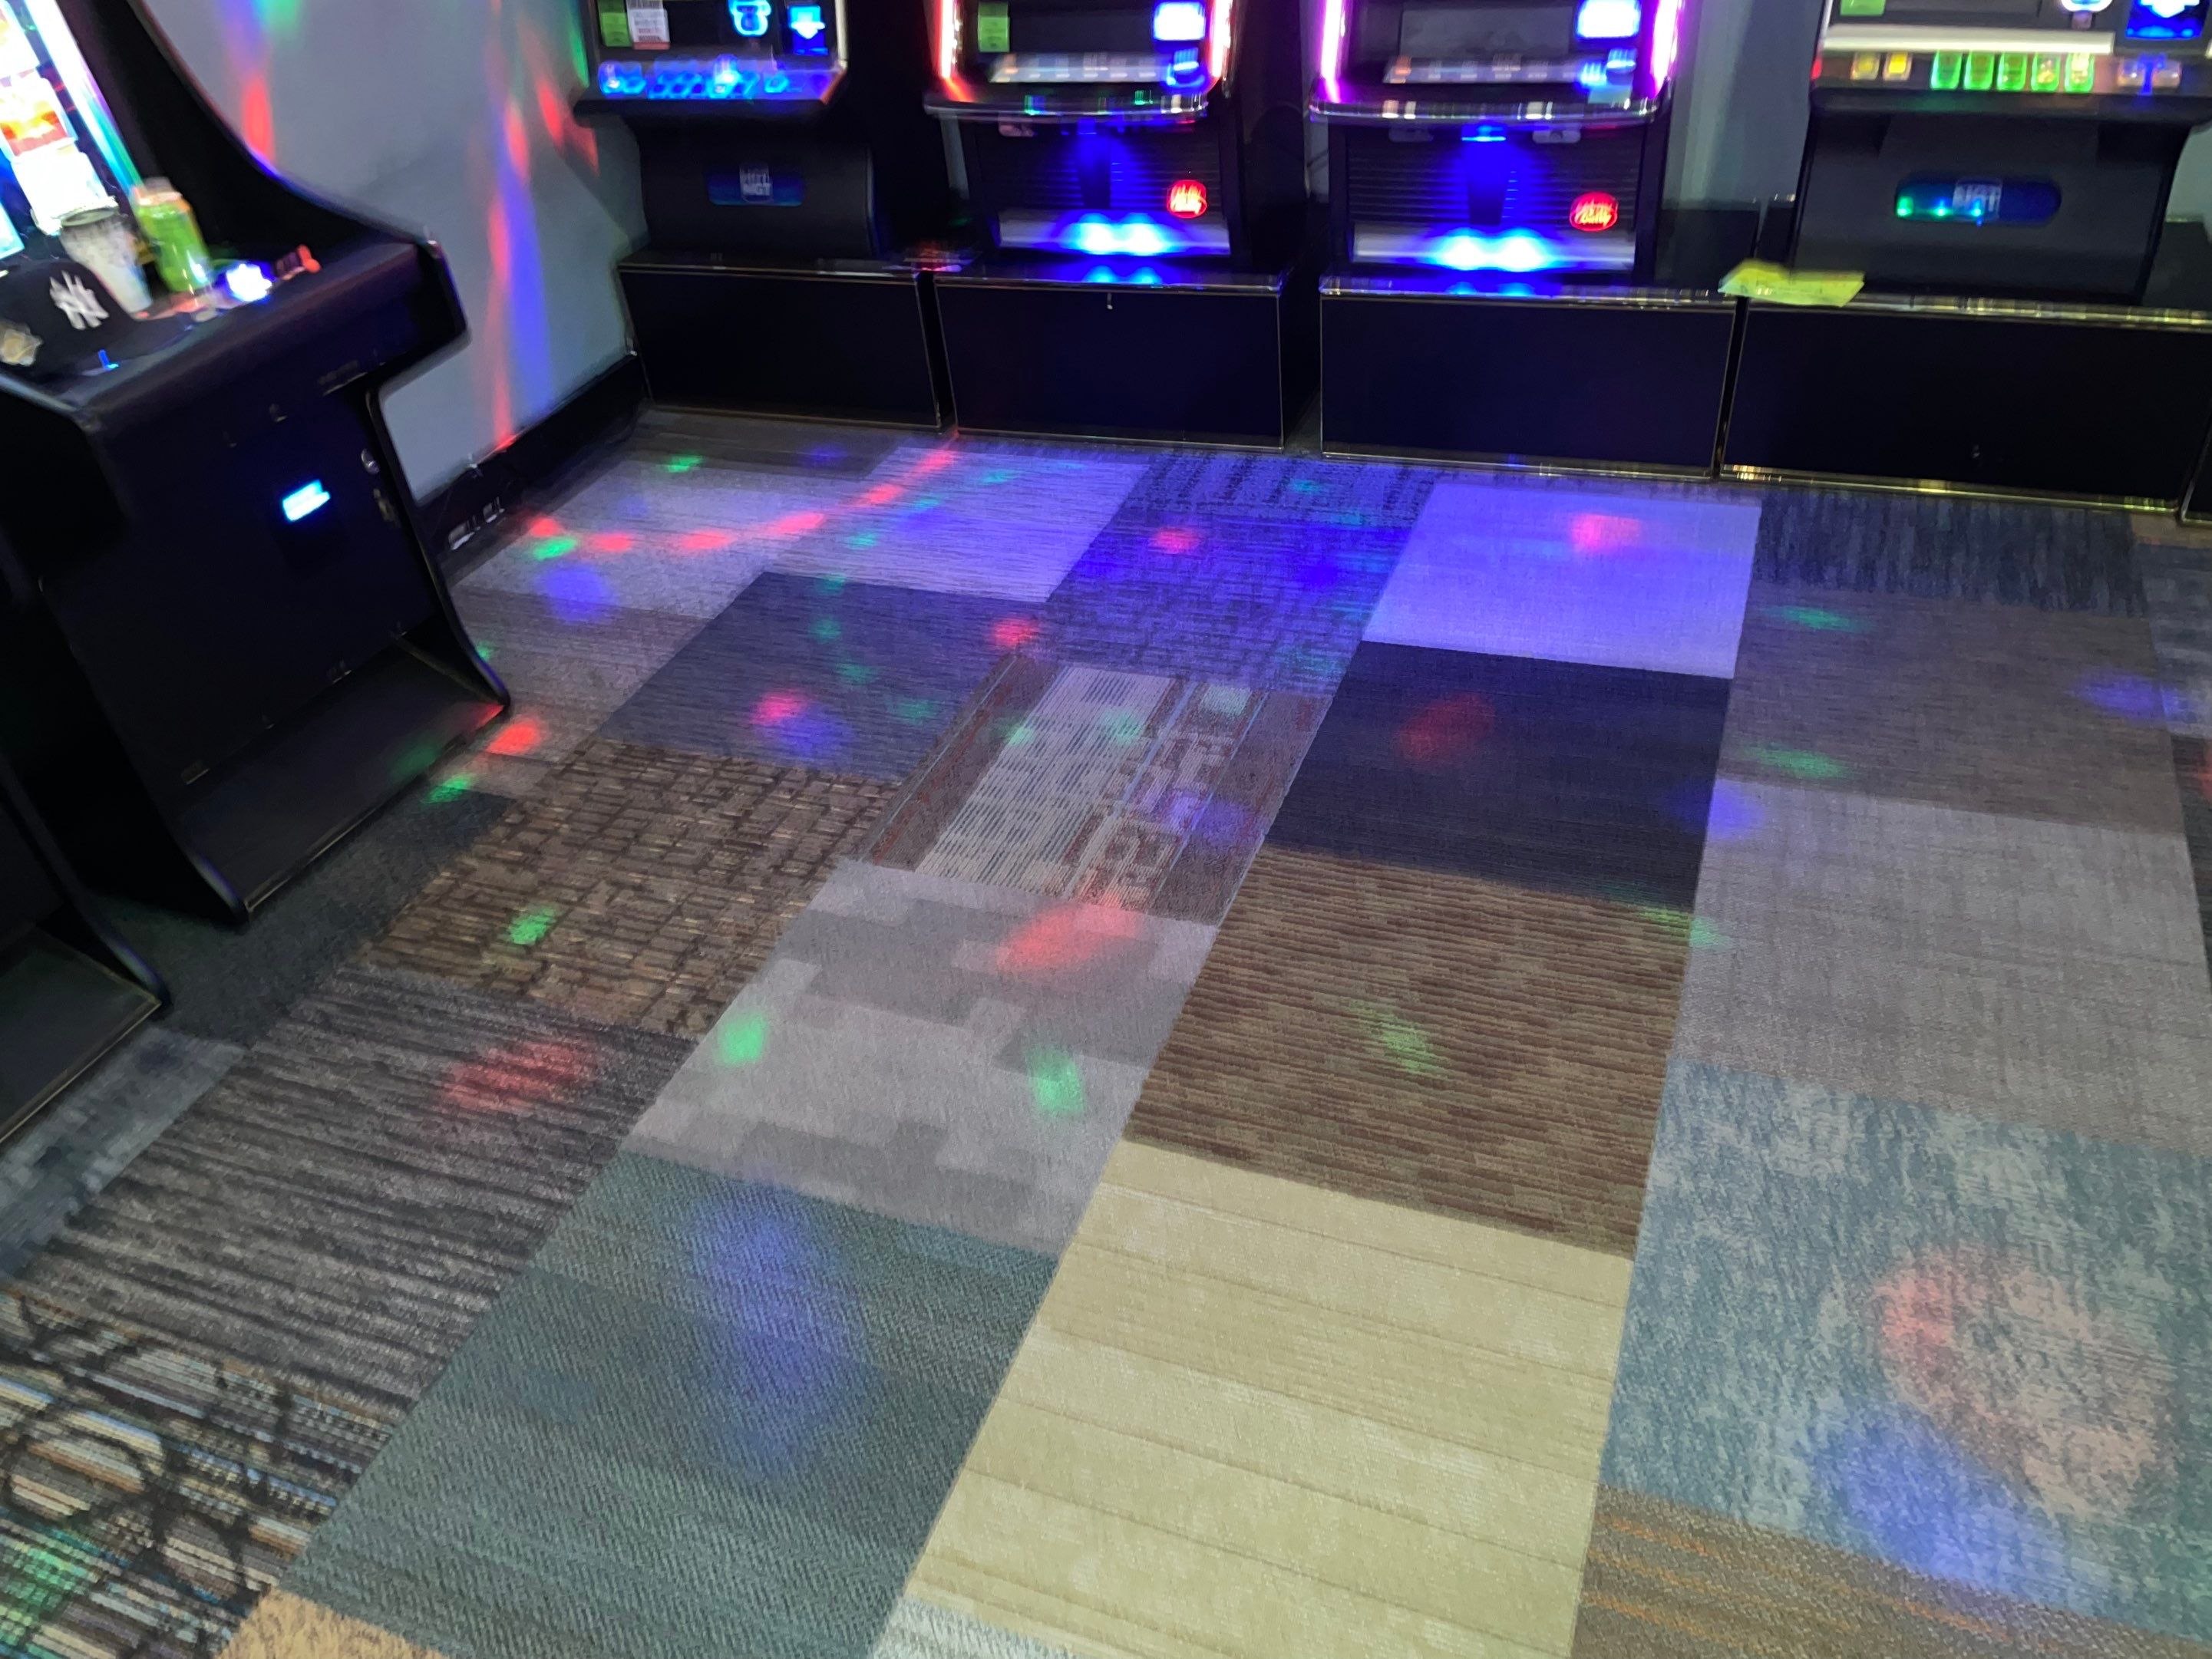 commercial carpet cleaning in an arcade or entertainment venue with patterned carpet between arcade machines